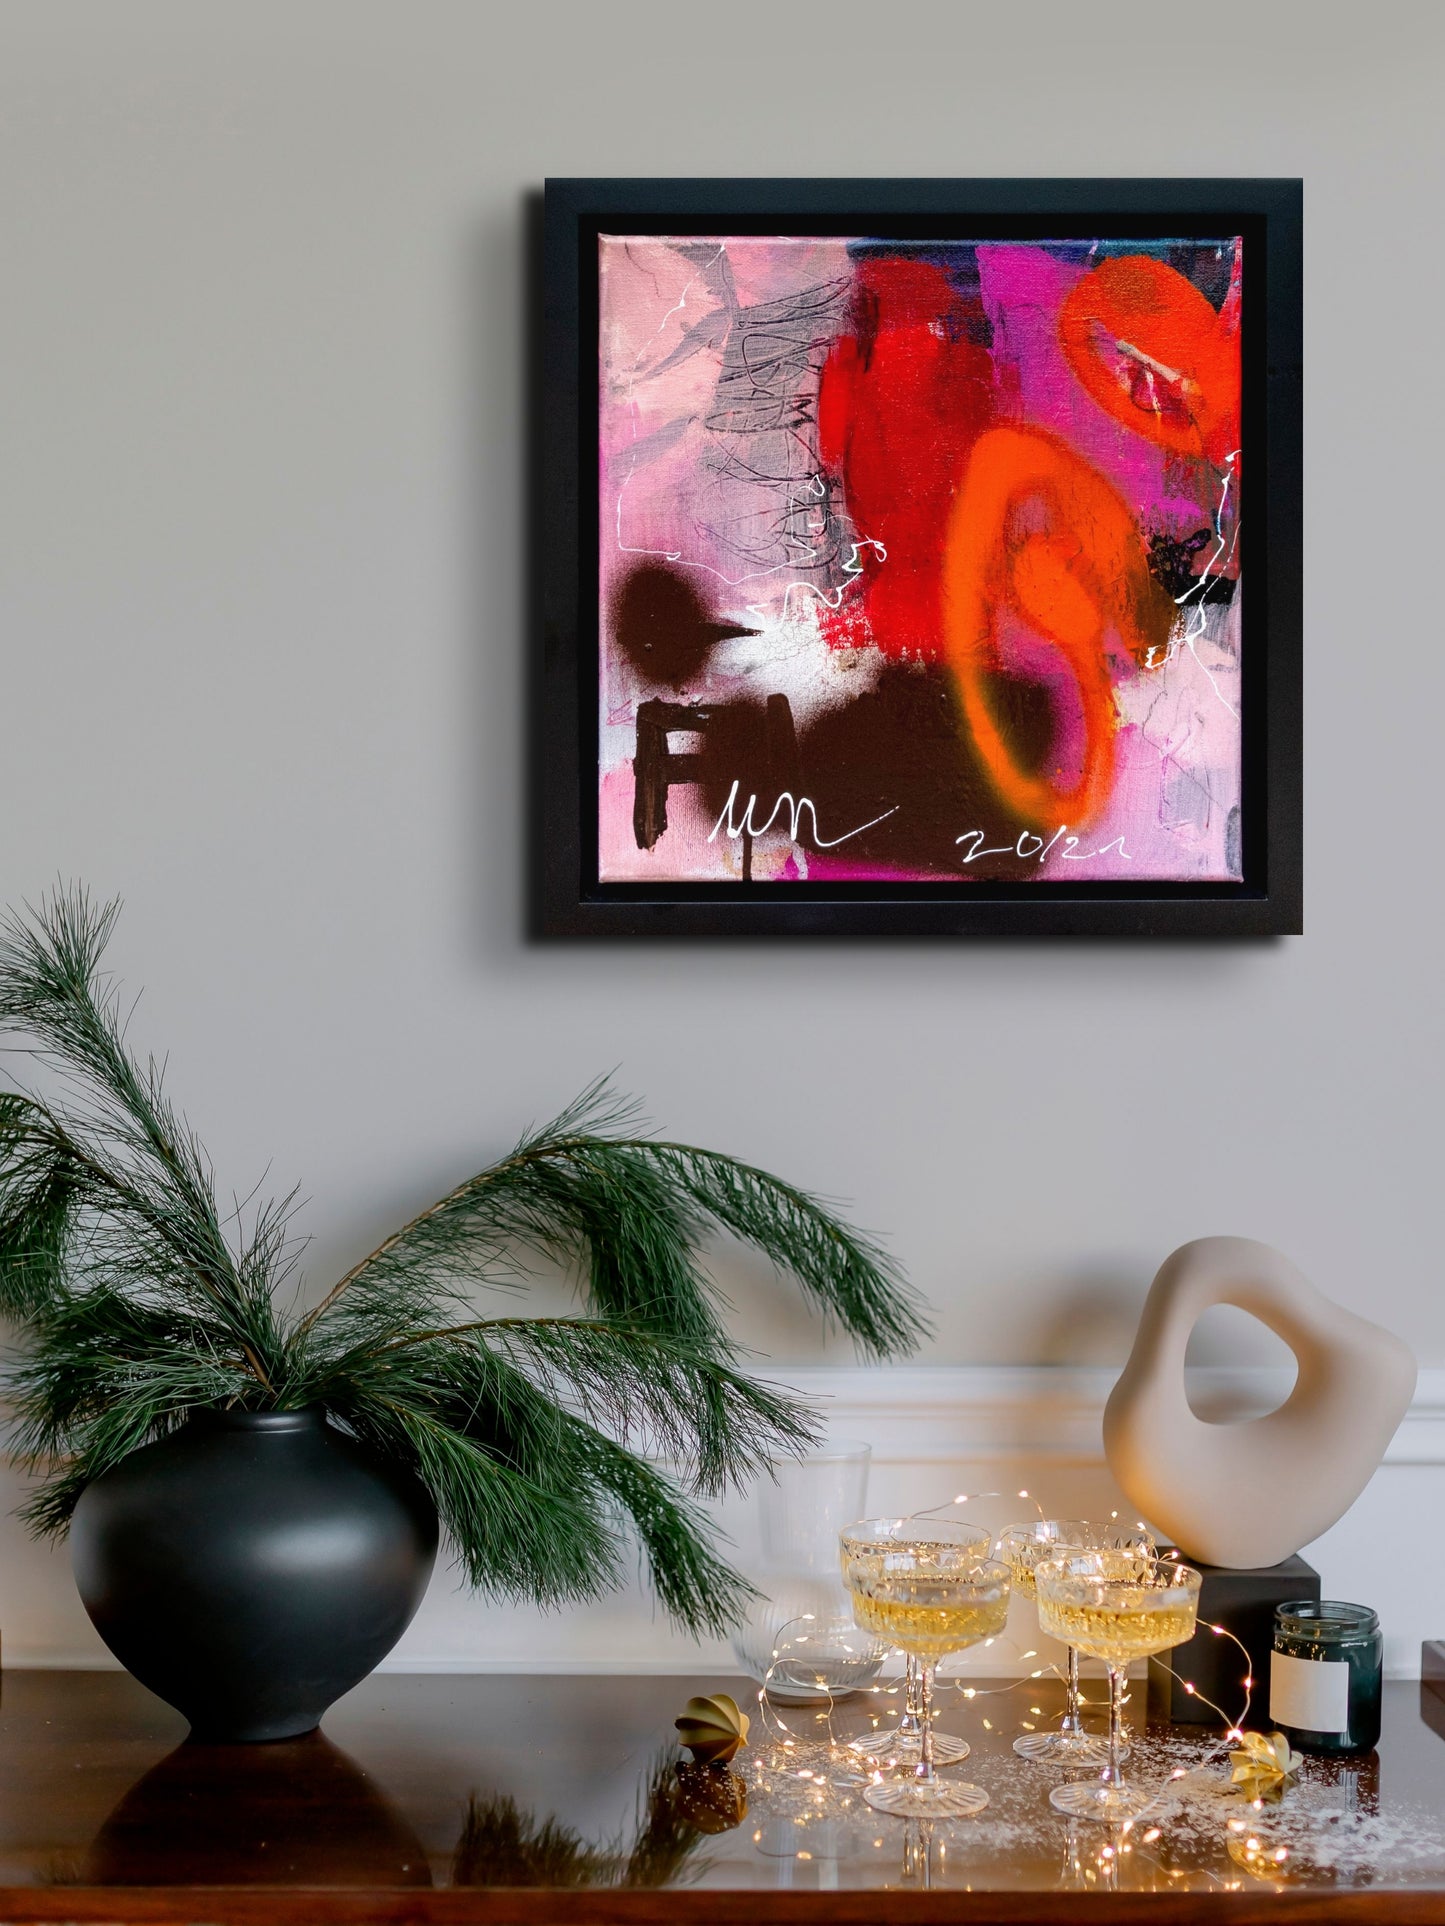 Colorful abstract painting using acrylic paint titled 'Fun' by artist Steffi Möllers; measures 12"x12" and 14"x14" with black framed; in situ on wall with champagne glasses and lights.